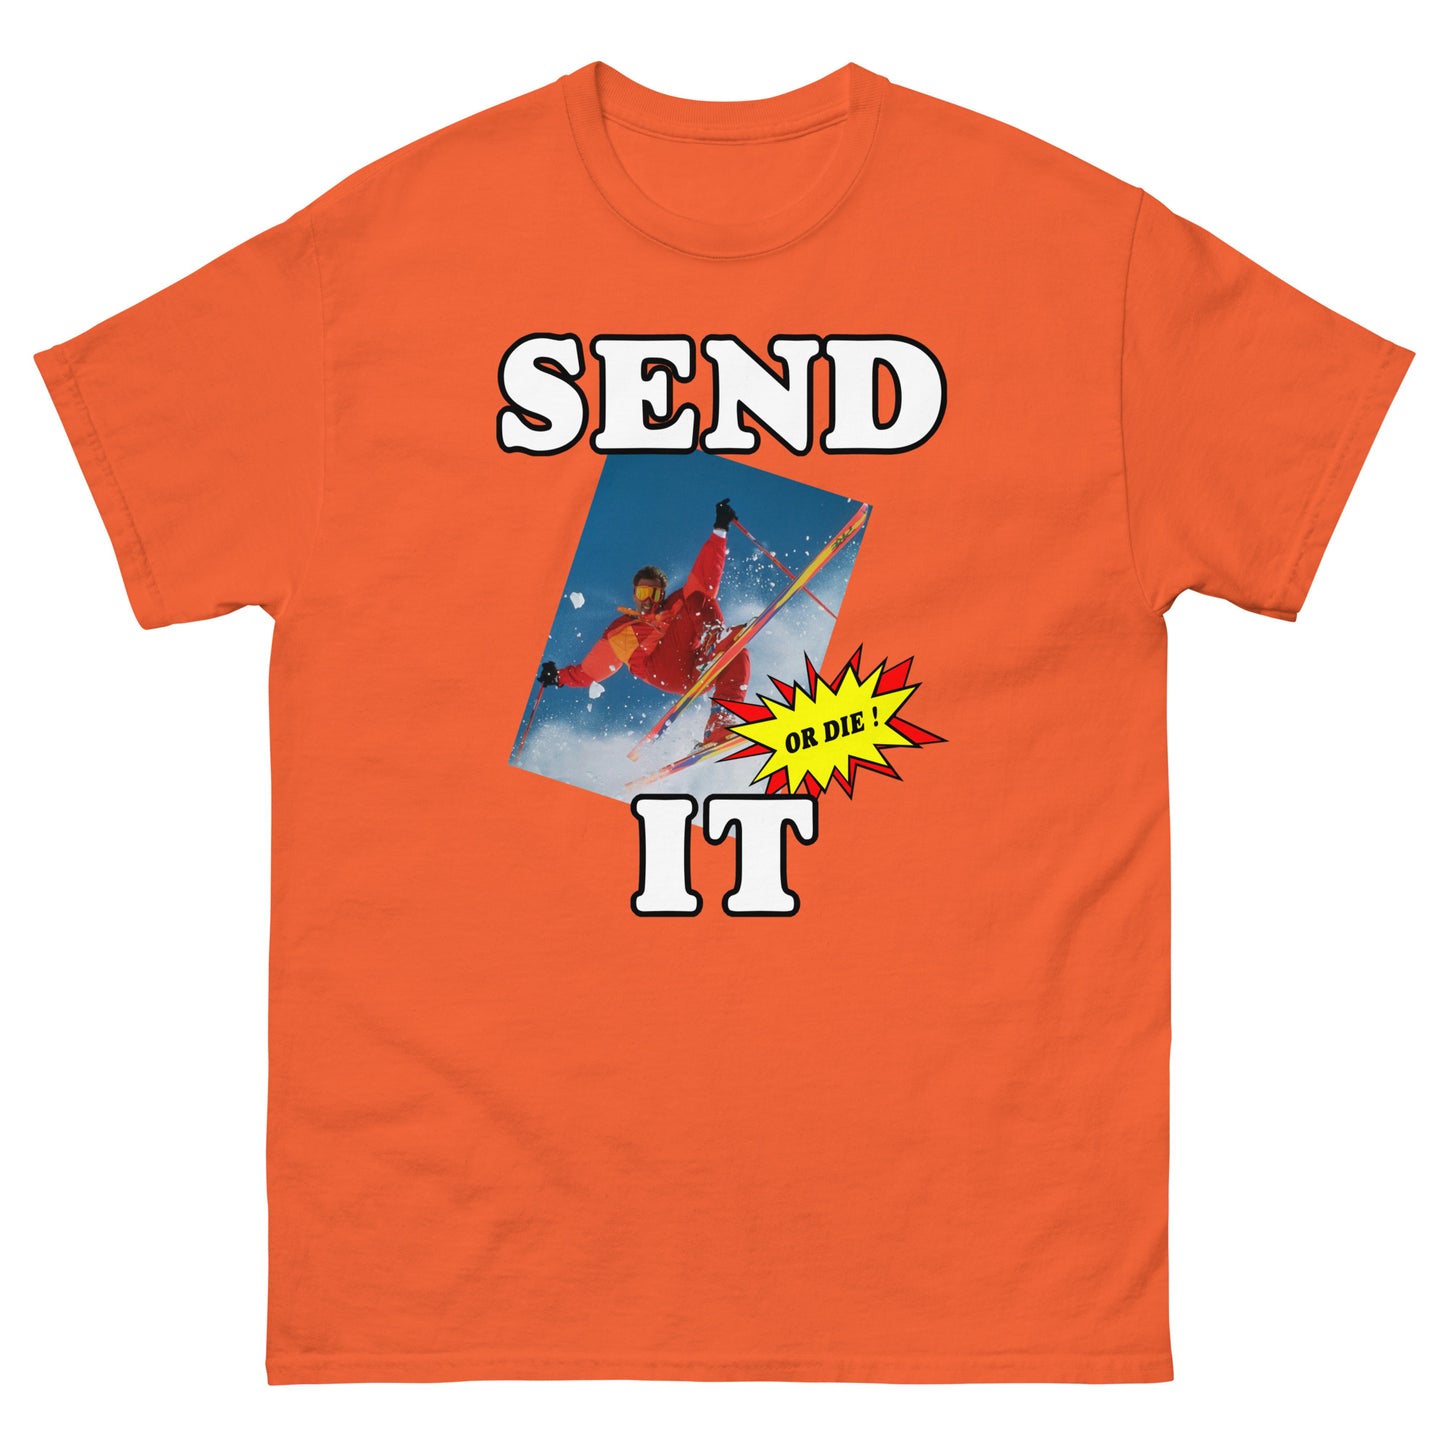 Send it or die extreme skier printed t-shirt by Whistler Shirts